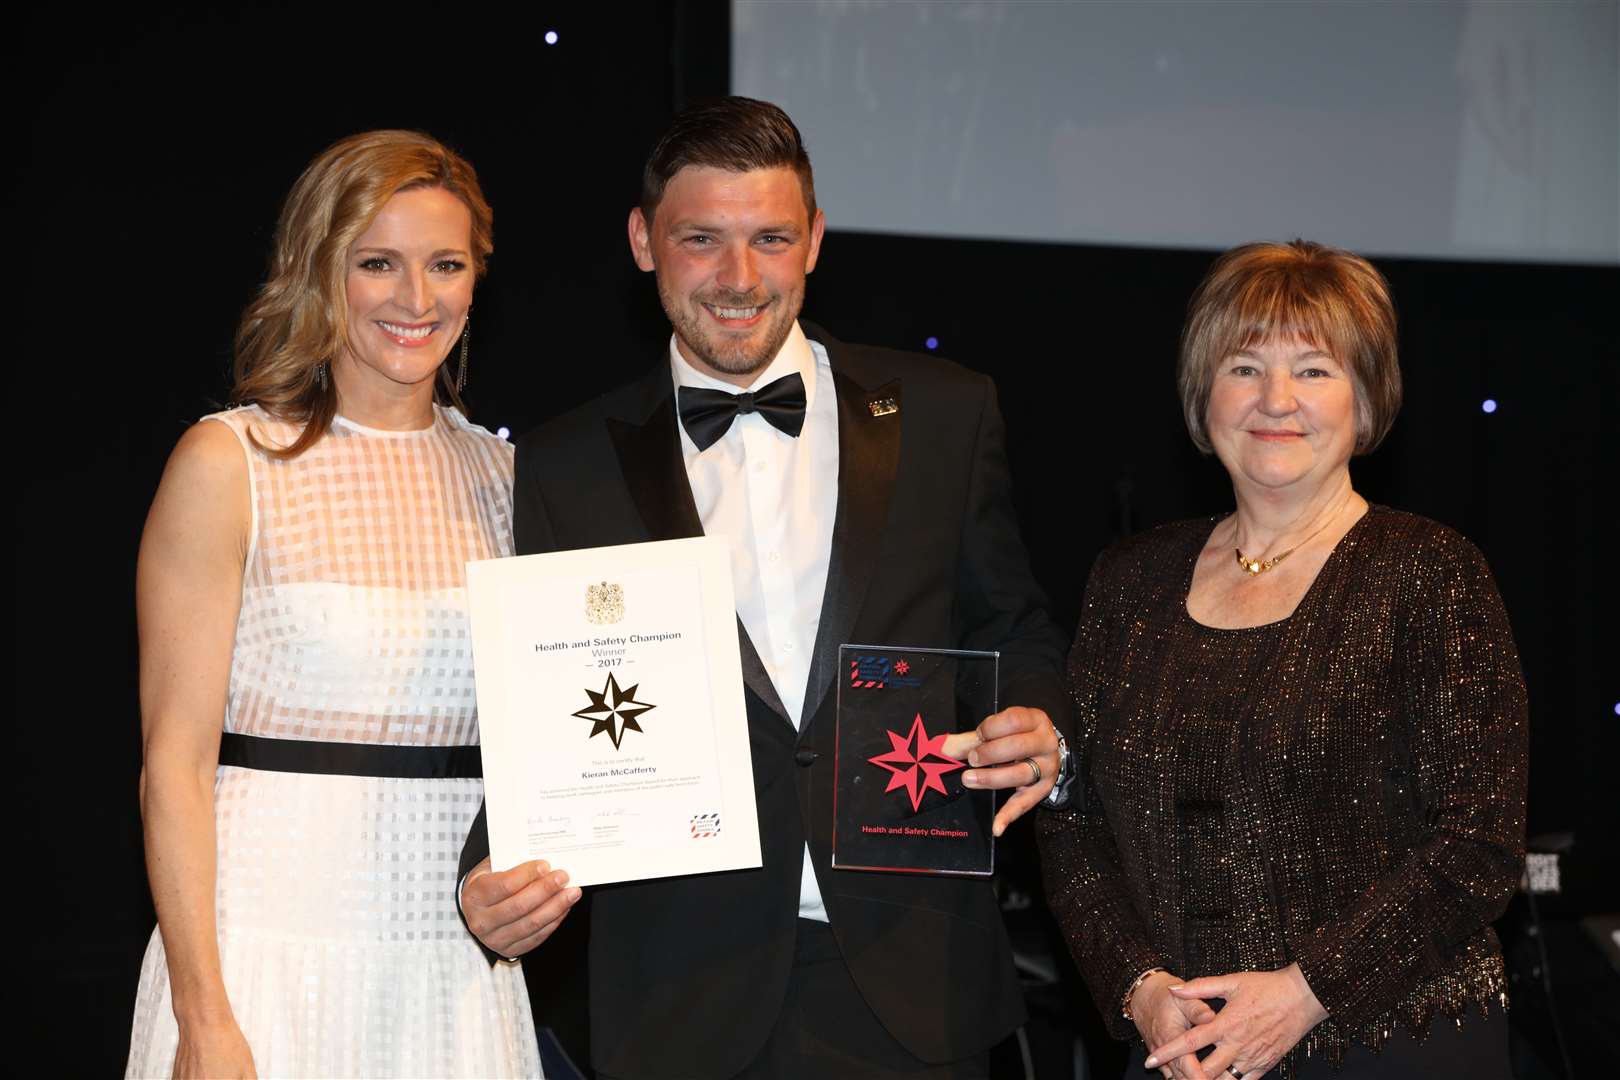 Walker Construction site supervisor Kieren McCafferty won the international safety champion award at the British Safety Council gala dinner, presented by Gabby Logan, left, and Lynda Armstrong OBE